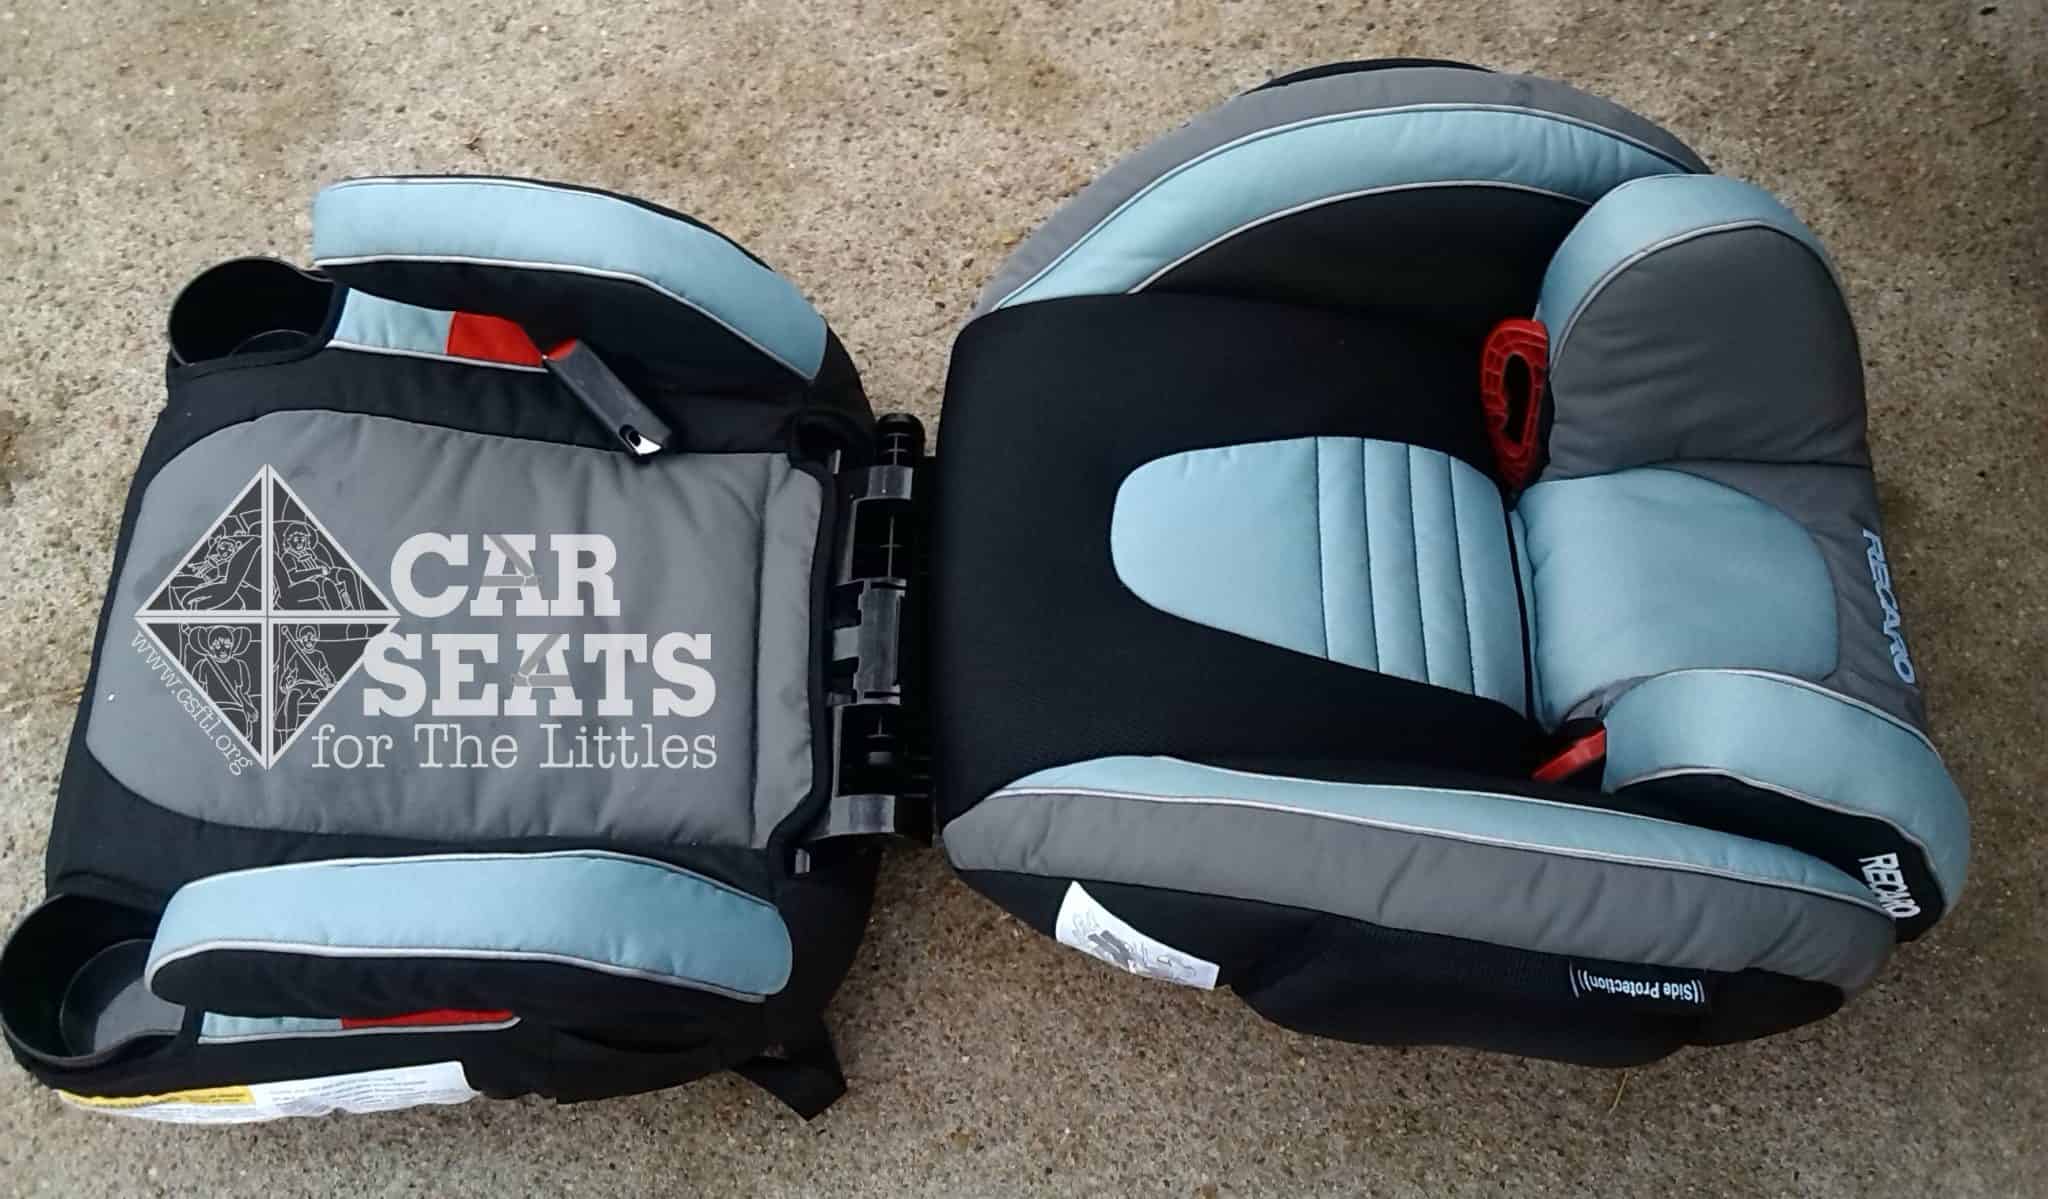 RECARO Performance Booster Review - Car Seats For The Littles